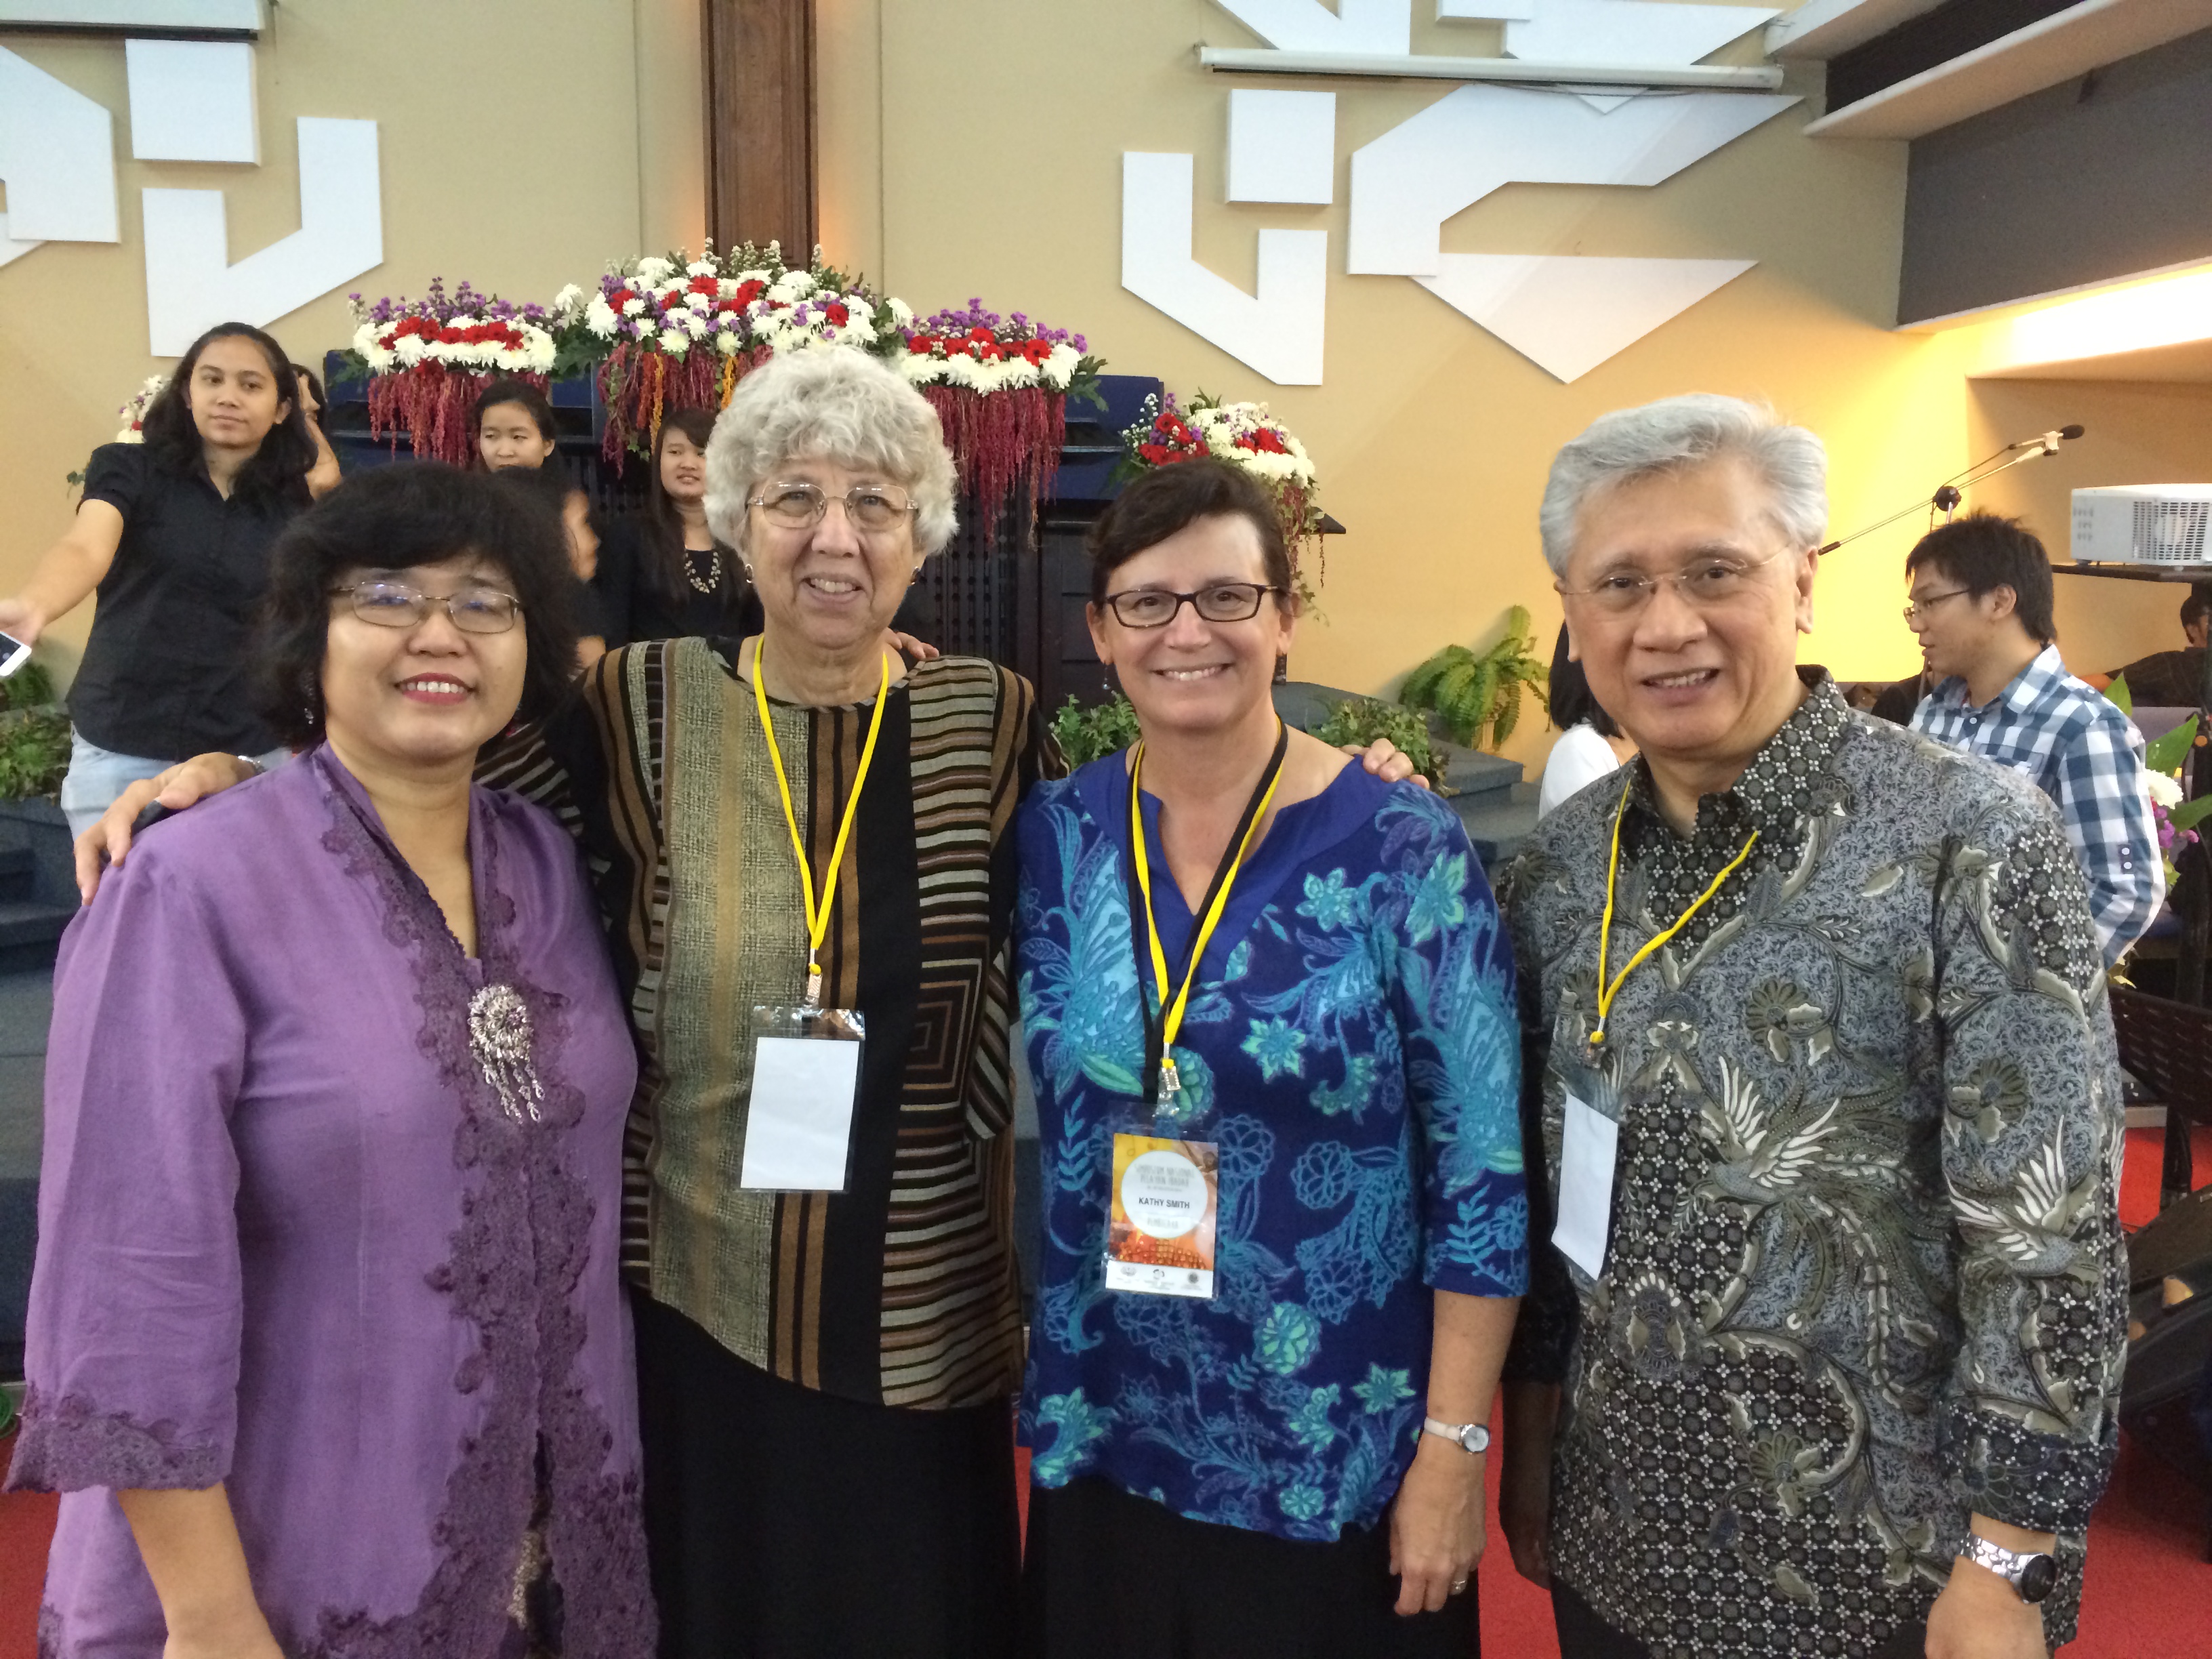 Symposium organizer Ester Pudjo Widiasih (on left) with guest presenters from the Calvin Institute of Christian Worship:  Emily Brink, Kathy Smith, and Joel Navarro.  